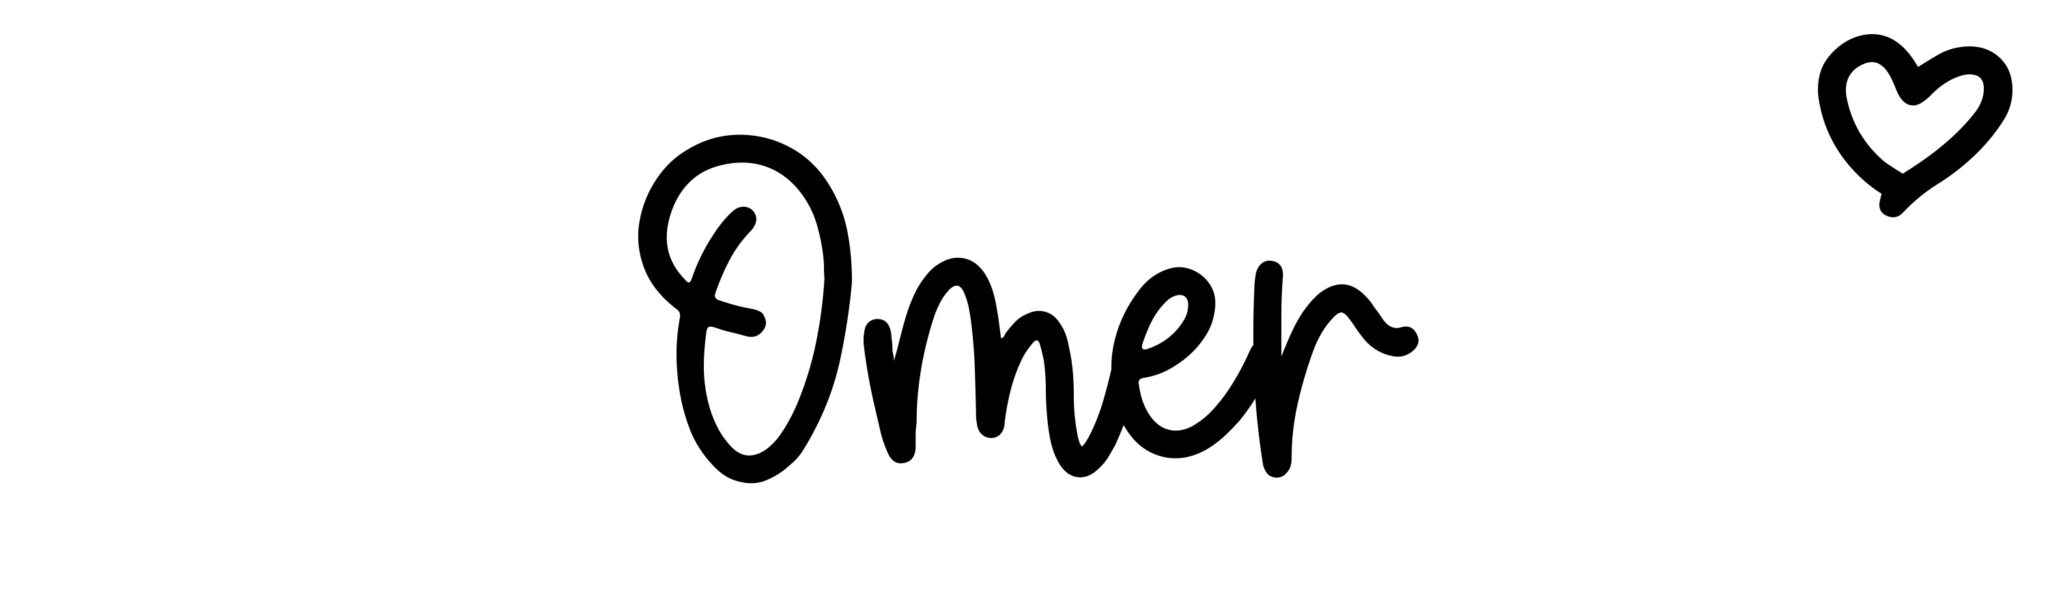 omer meaning